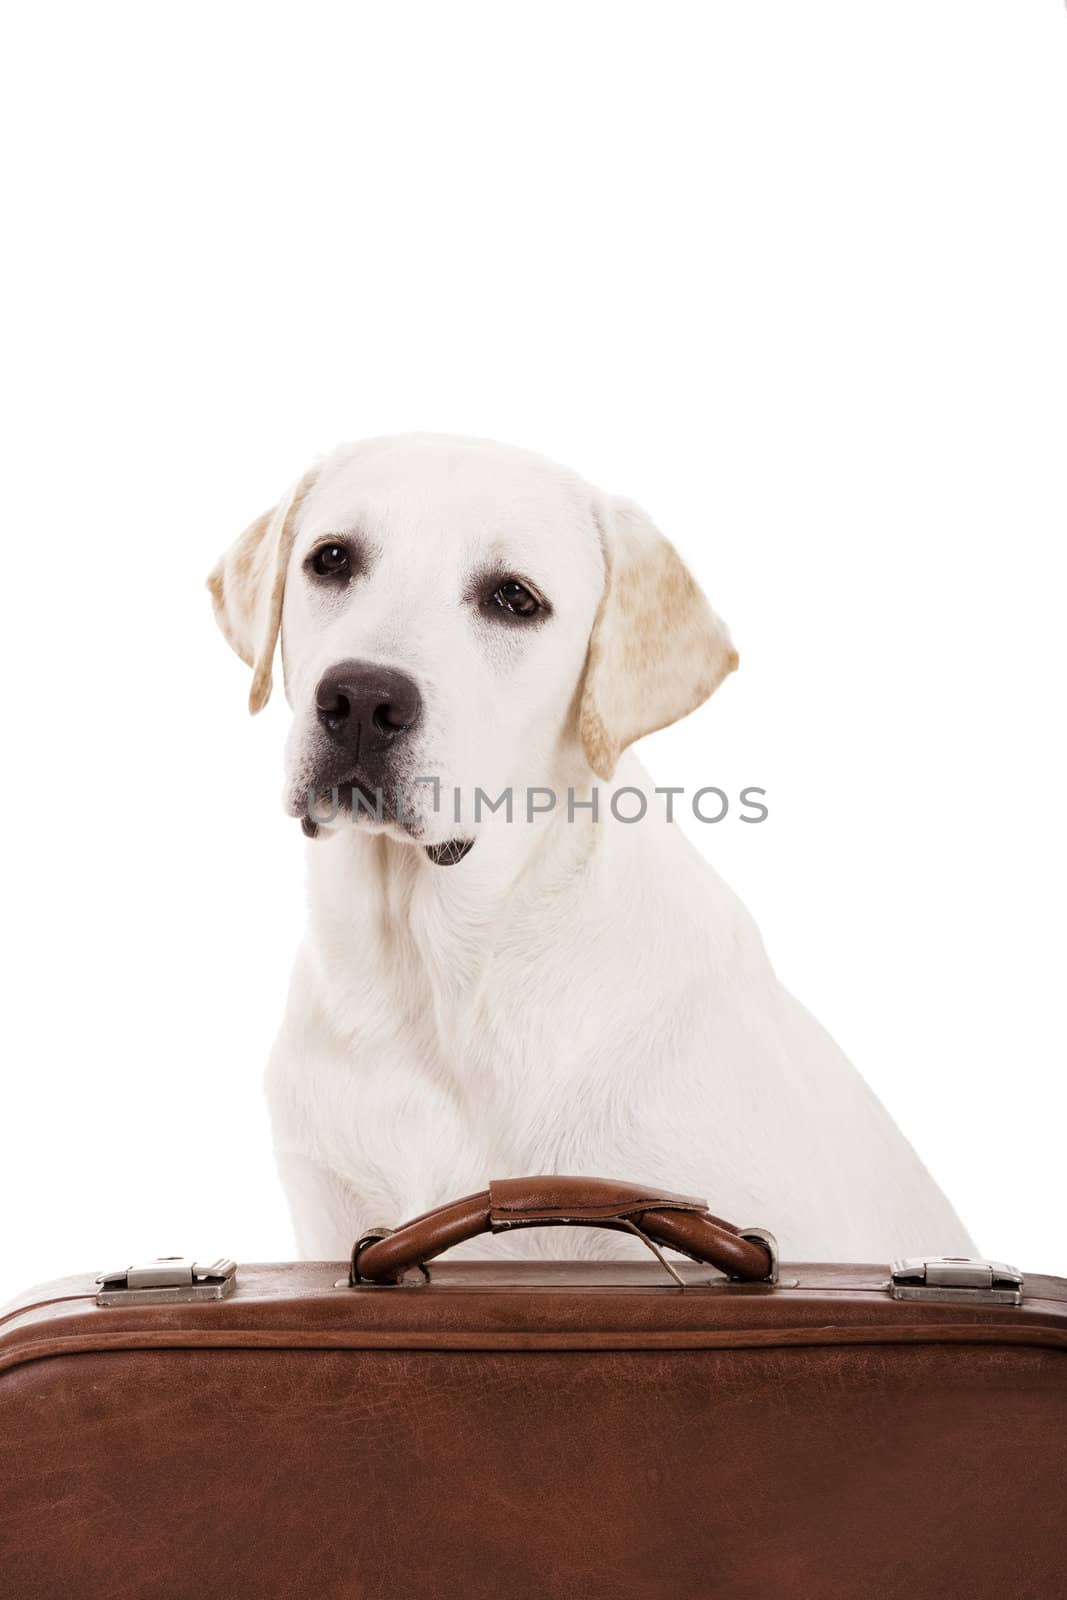 Dog with a suitcase by Iko